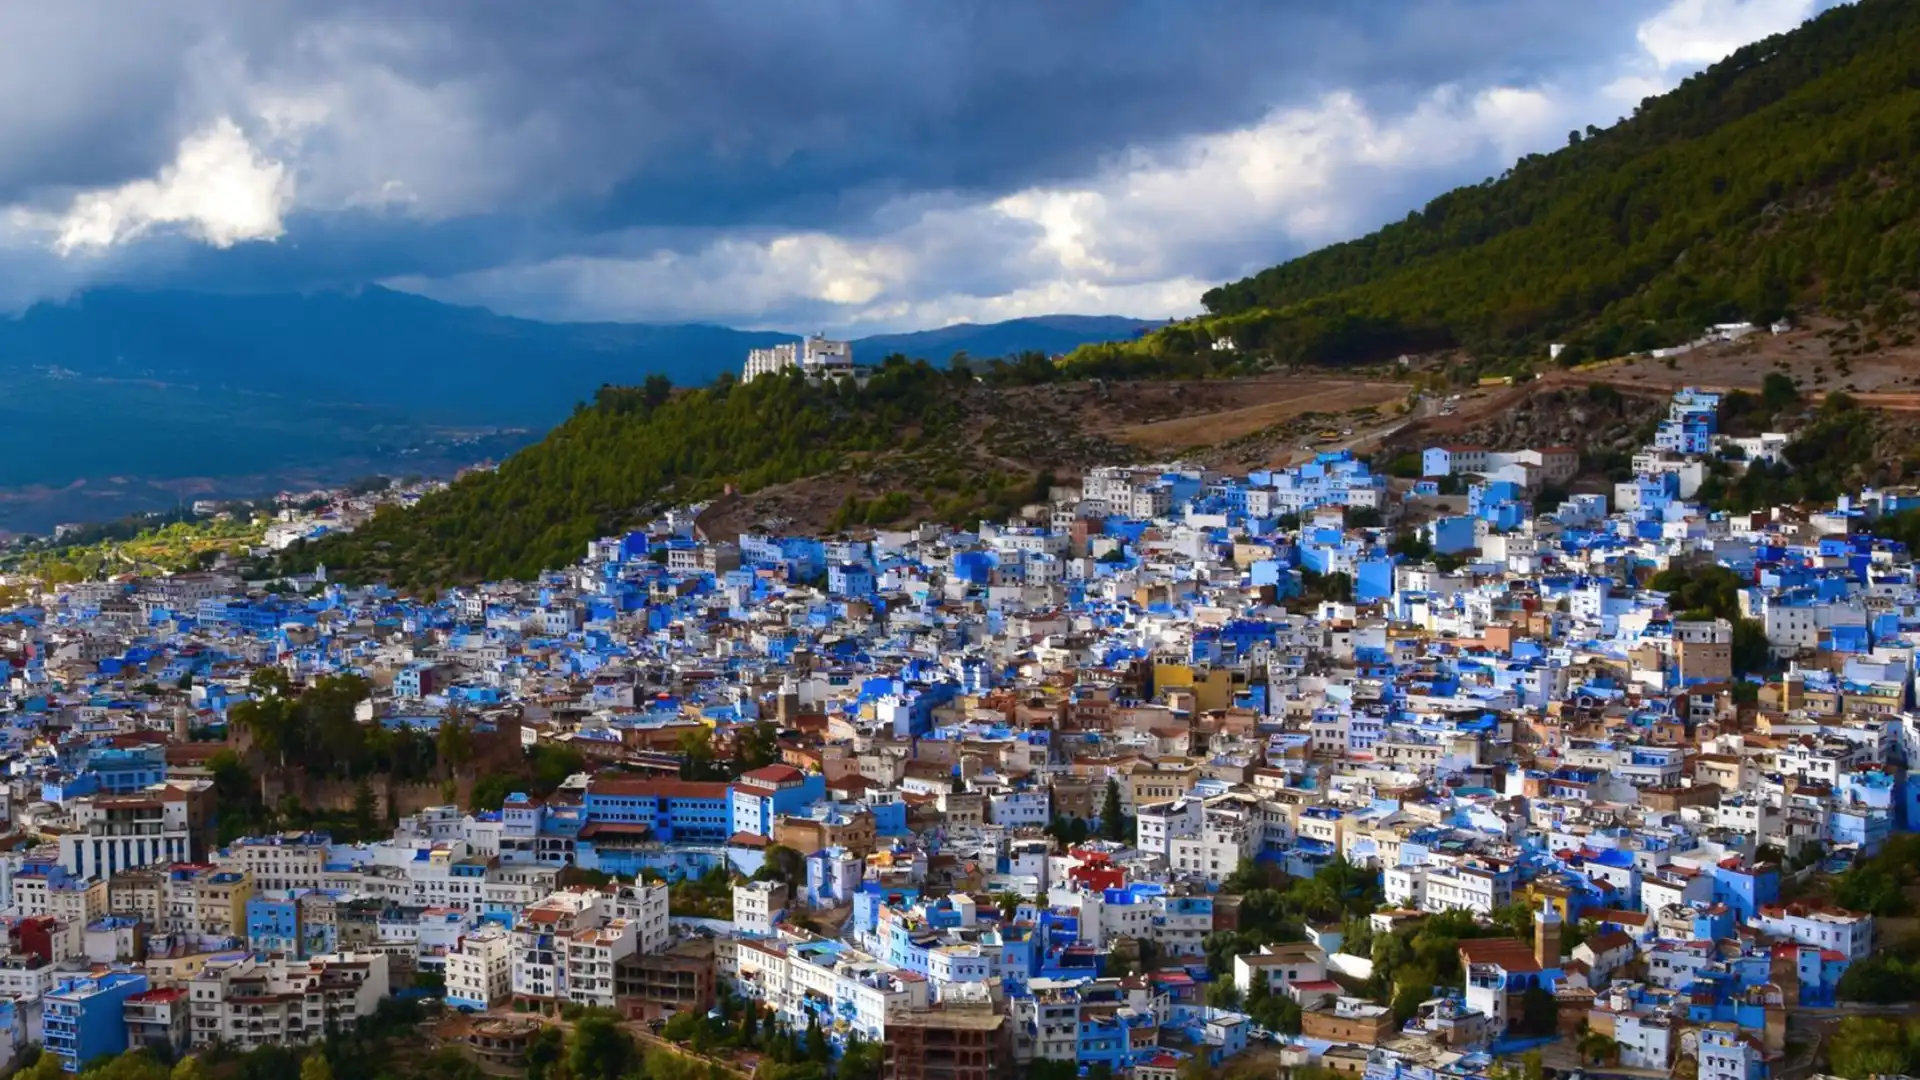 The Spanish Mosque of Chefchaouen